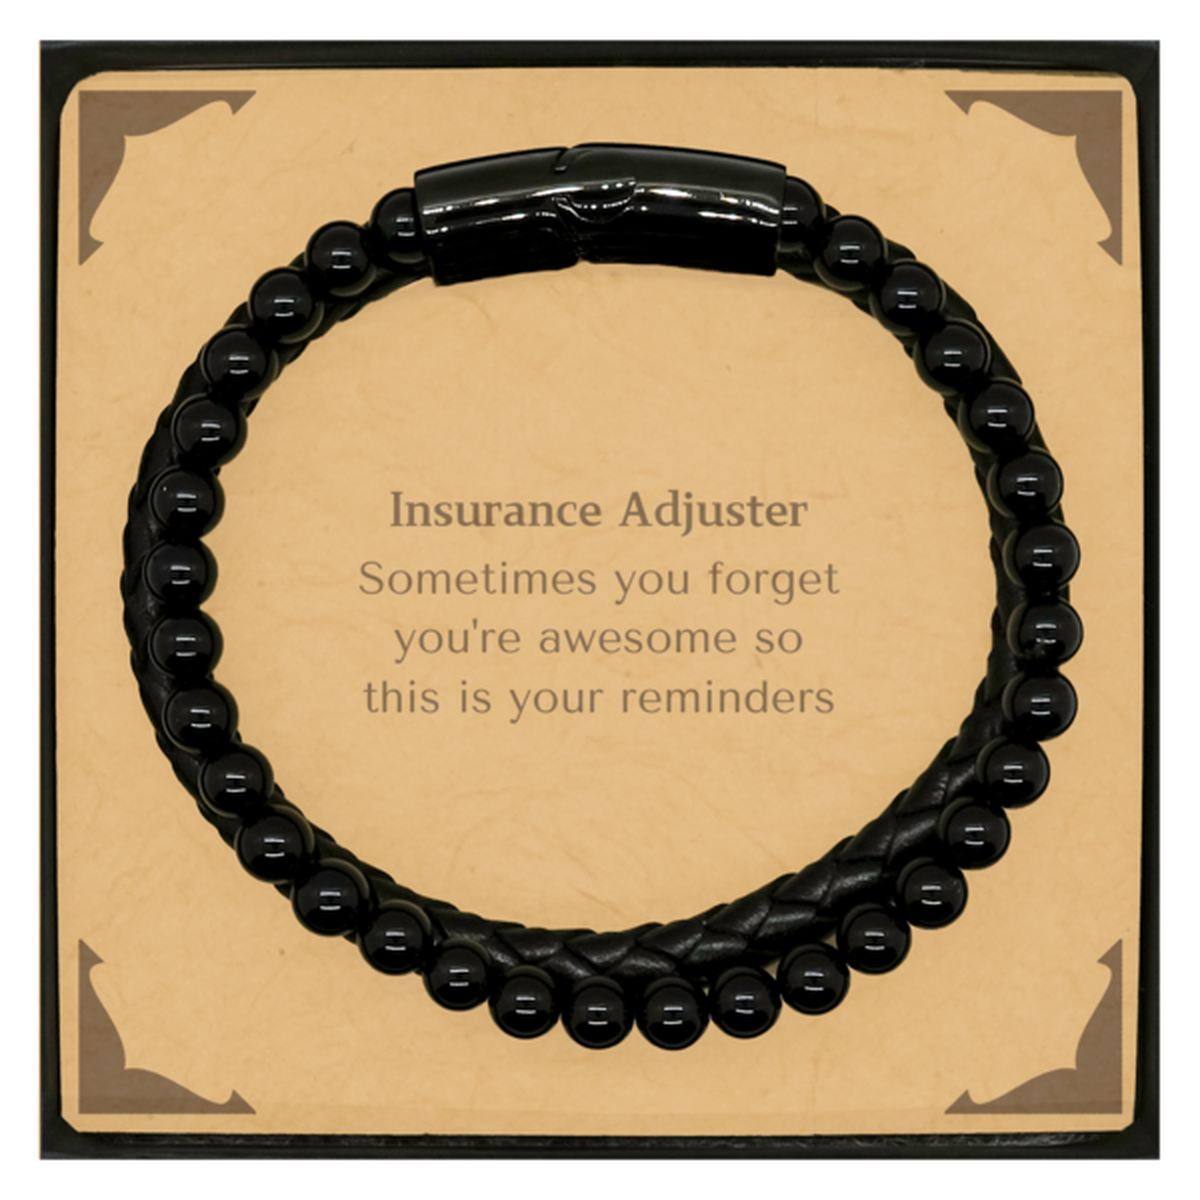 Sentimental Insurance Adjuster Stone Leather Bracelets, Insurance Adjuster Sometimes you forget you're awesome so this is your reminders, Graduation Christmas Birthday Gifts for Insurance Adjuster, Men, Women, Coworkers